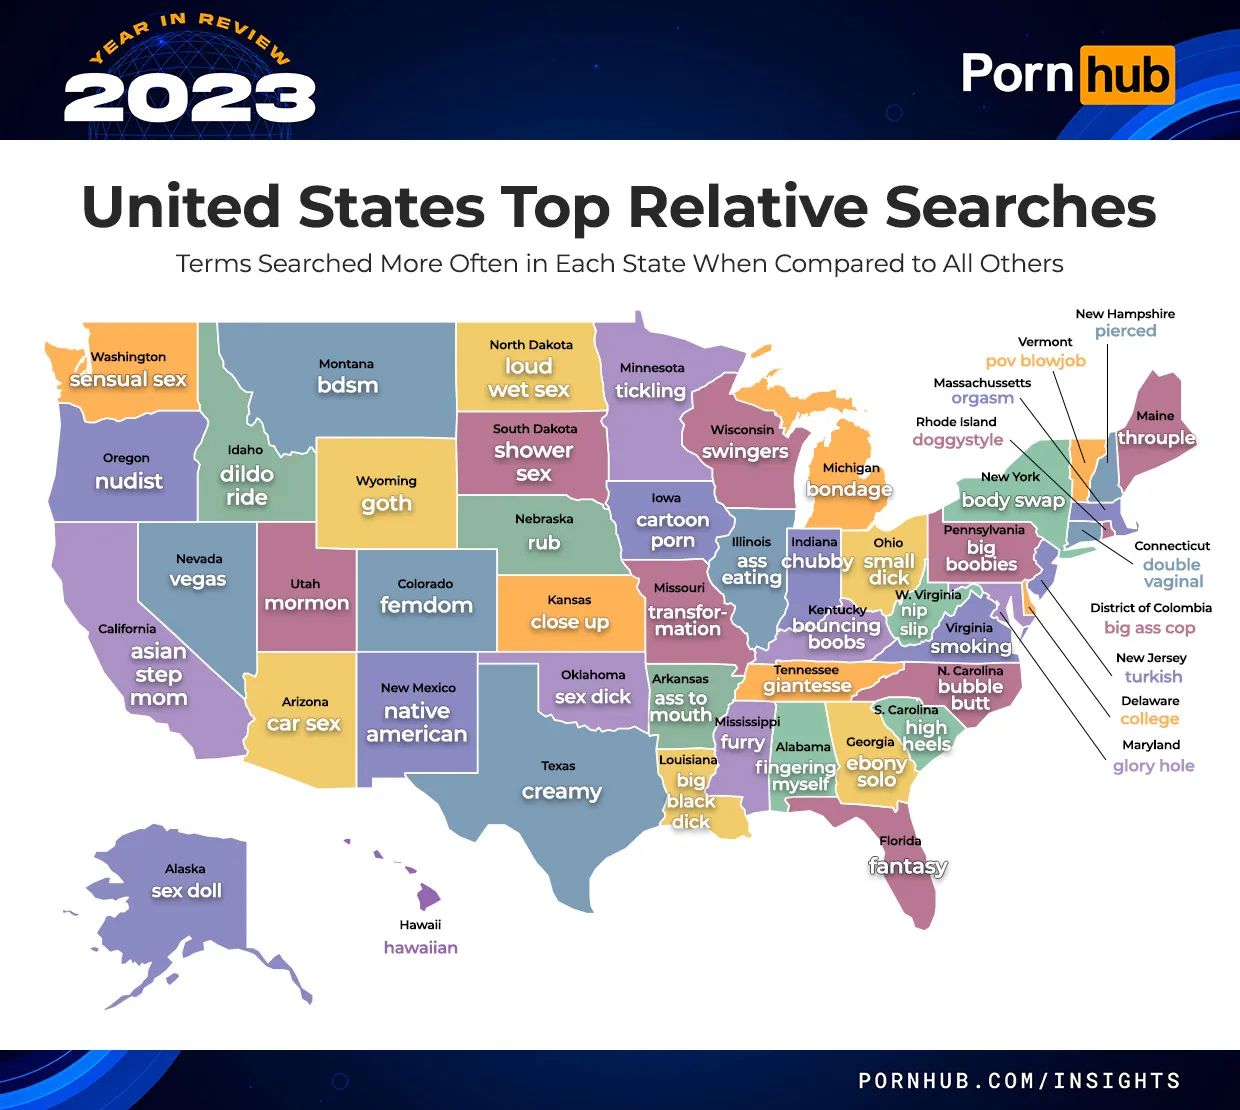 pornhub-insights-2023-year-in-review-uni